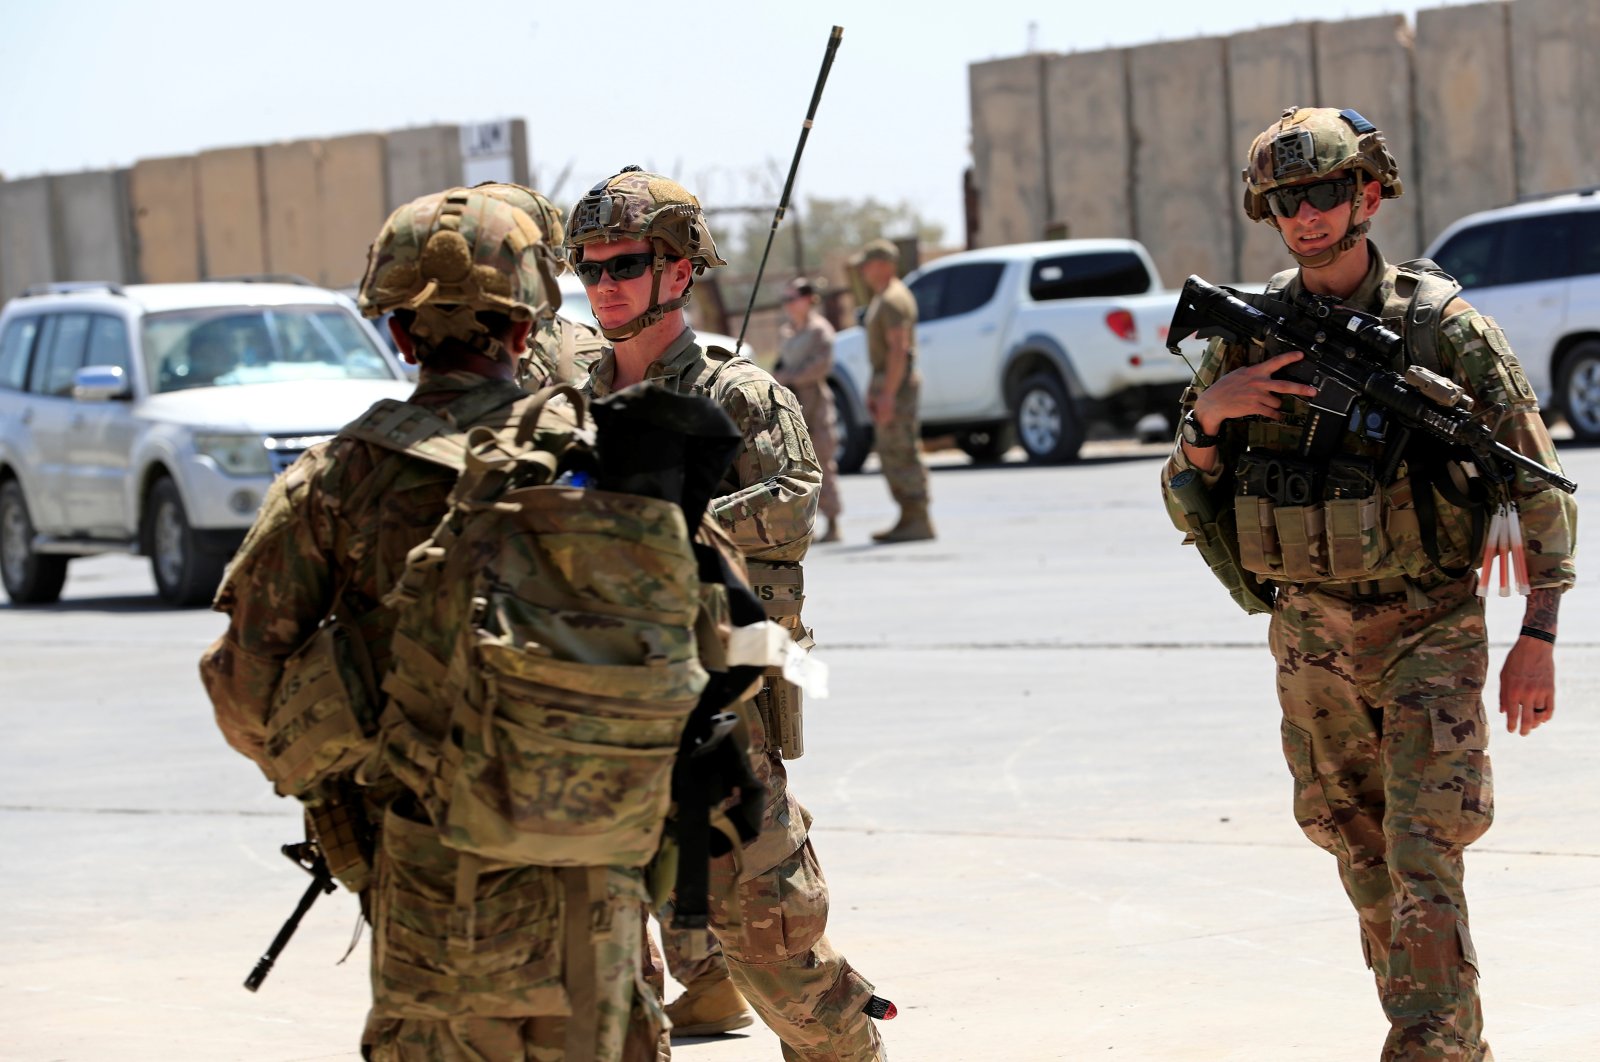 U.S. soldiers are seen during a handover ceremony of Taji military base from U.S.-led coalition troops to Iraqi security forces, in the base north of Baghdad, Iraq, Aug. 23, 2020. (Reuters Photo)